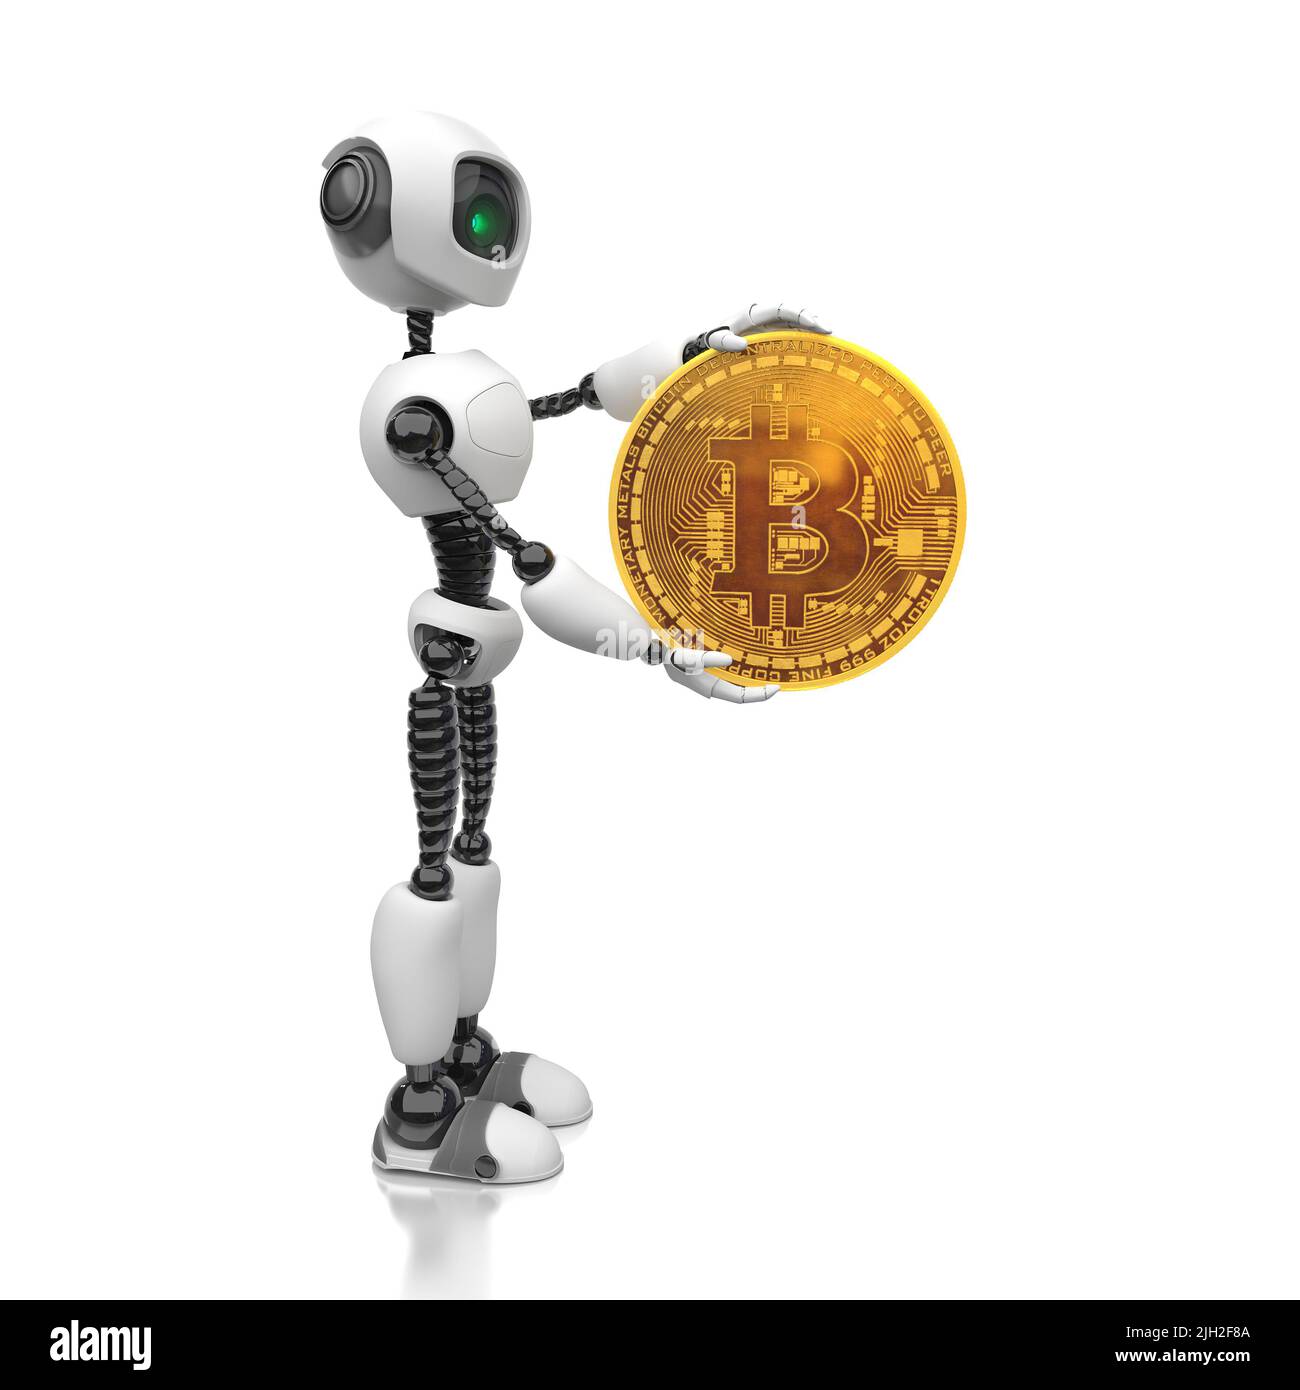 Trading bot. A humanoid robot holds a golden Bitcoin coin in its hand. Creative conceptual illustration on a white background. 3D rendering Stock Photo